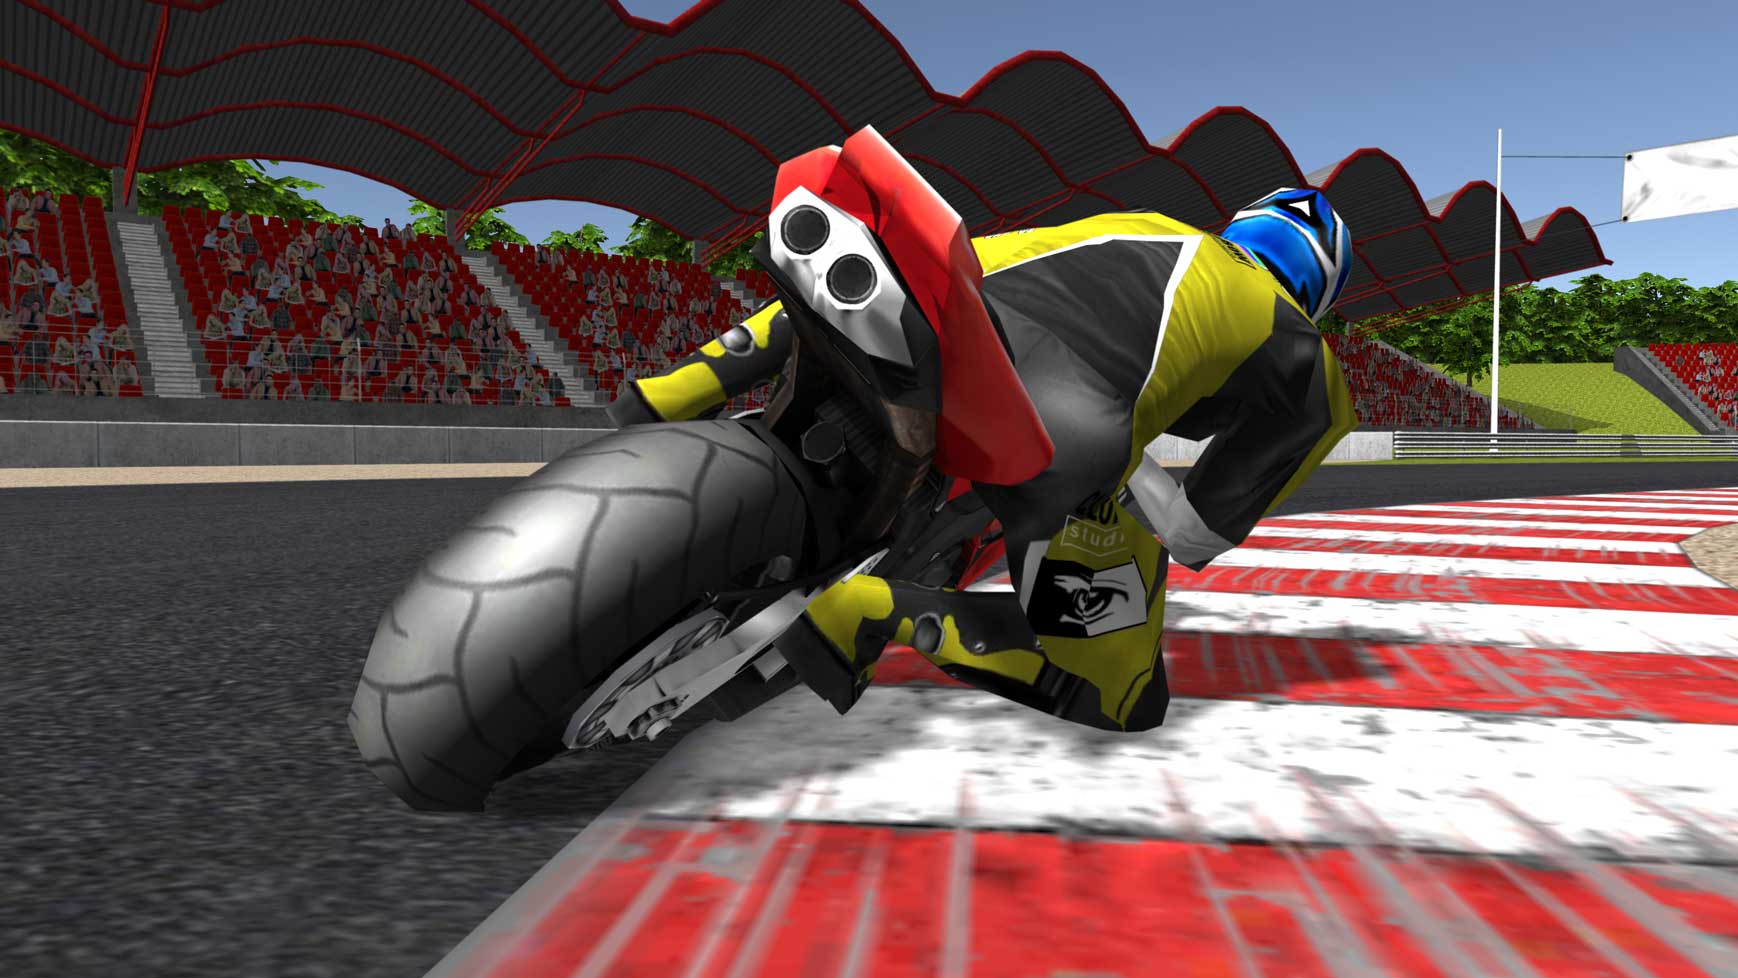 Homewreckers Studio has released a realistic motorcycle racing game for PC